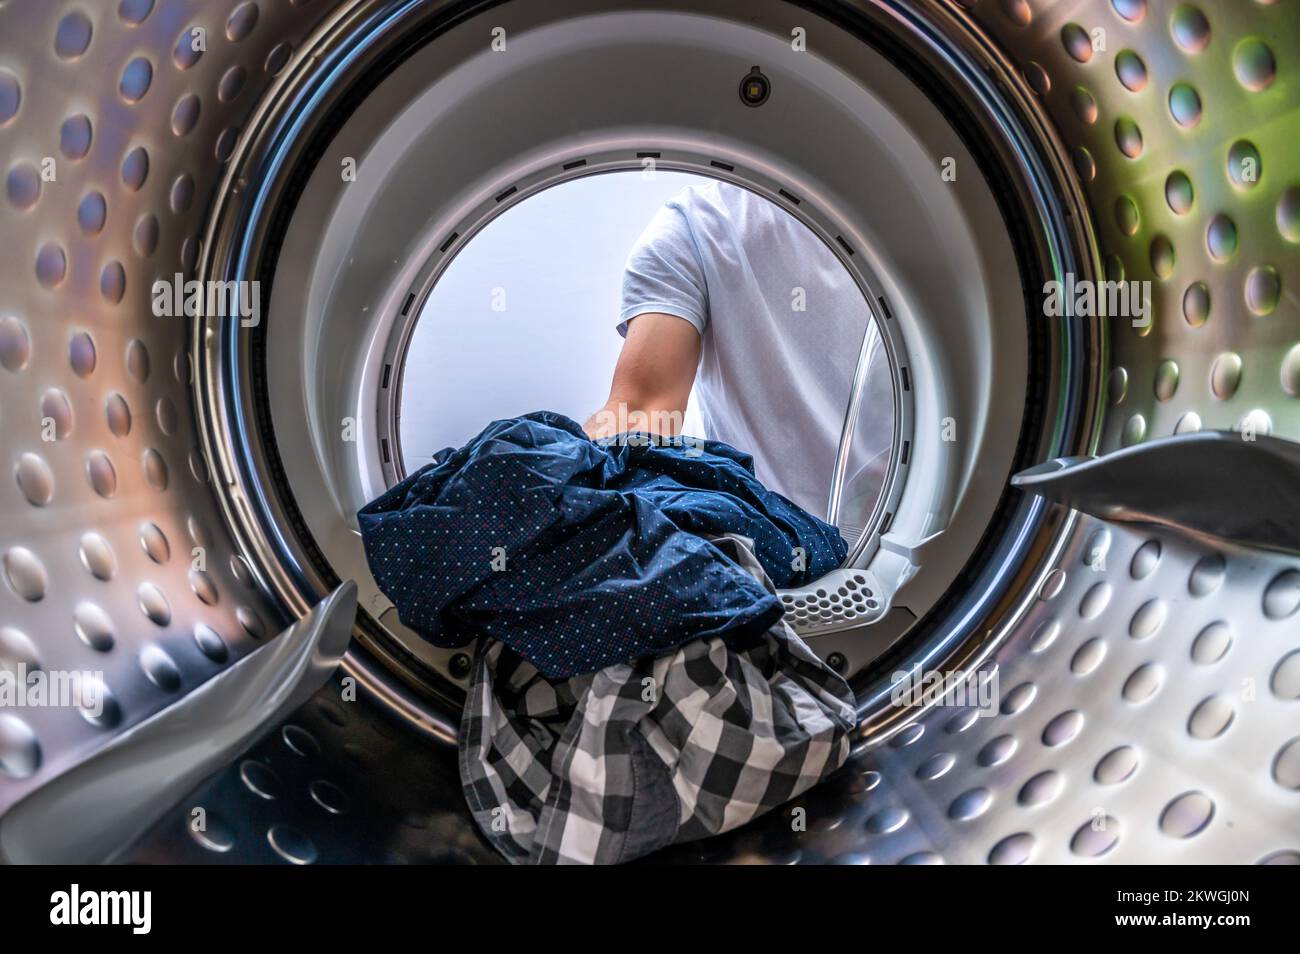 View from a washing machine when loading the washing drum with laundry Stock Photo